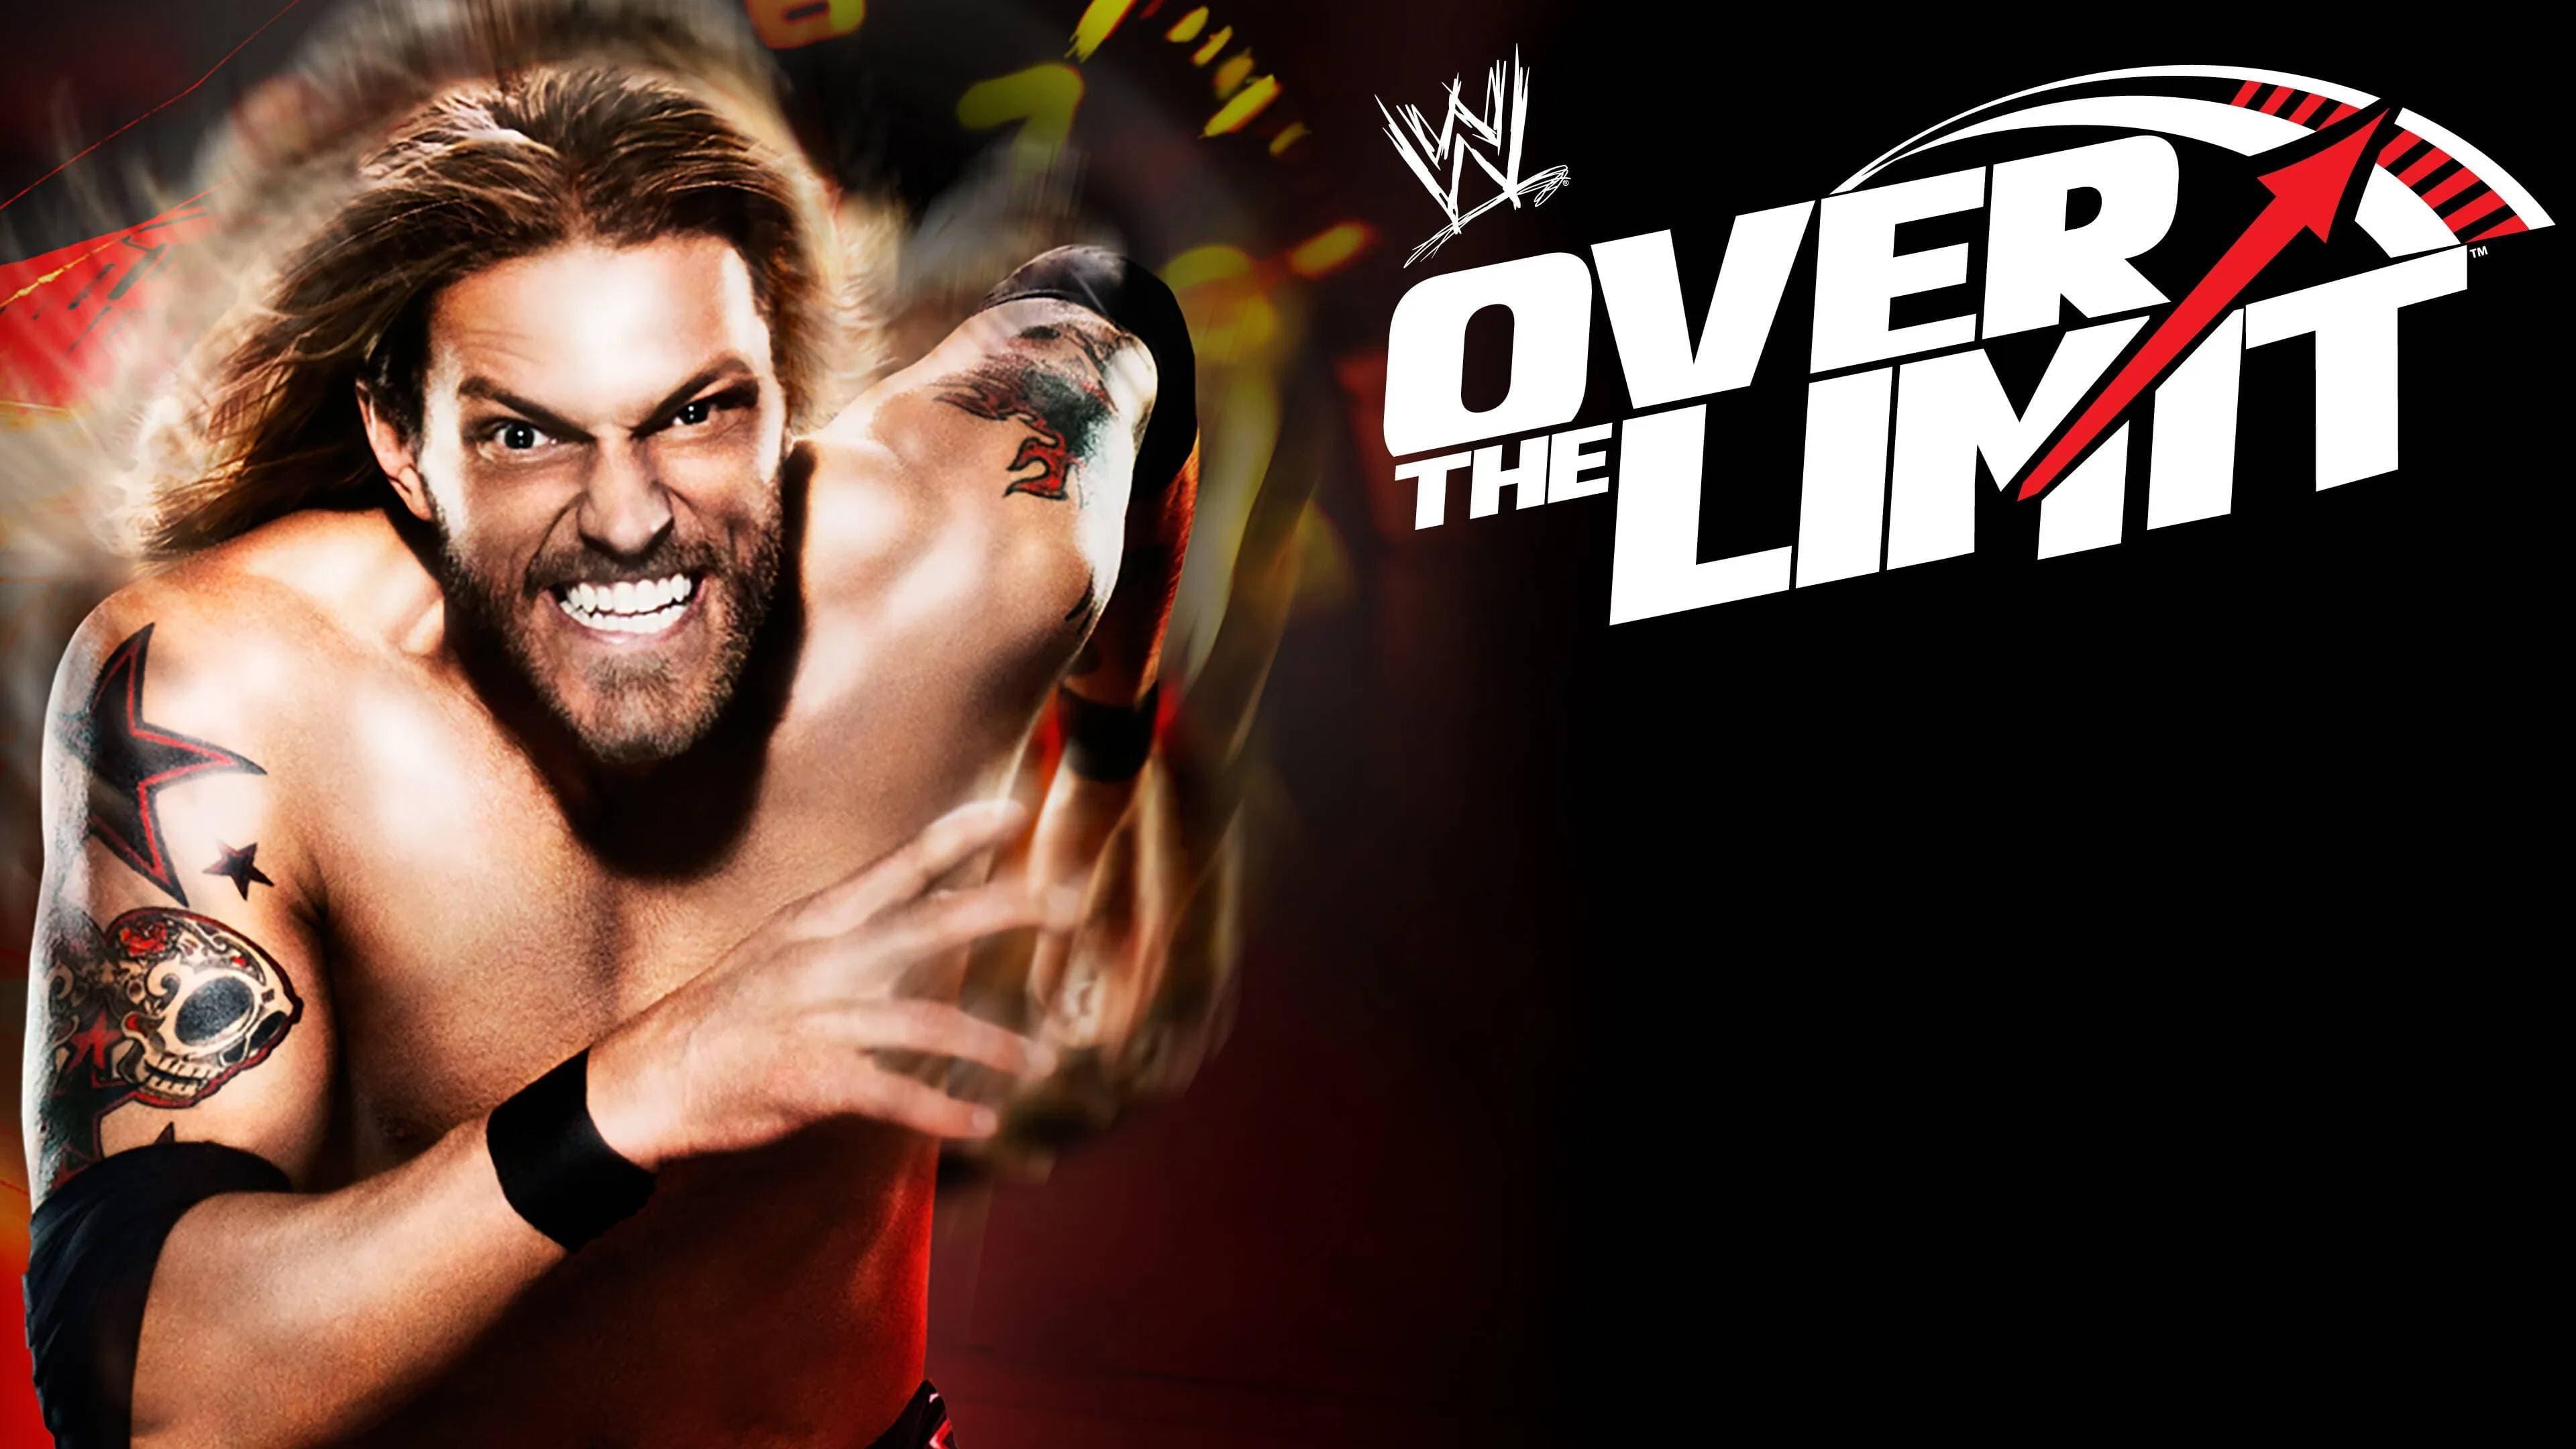 WWE Over the Limit 2010 backdrop